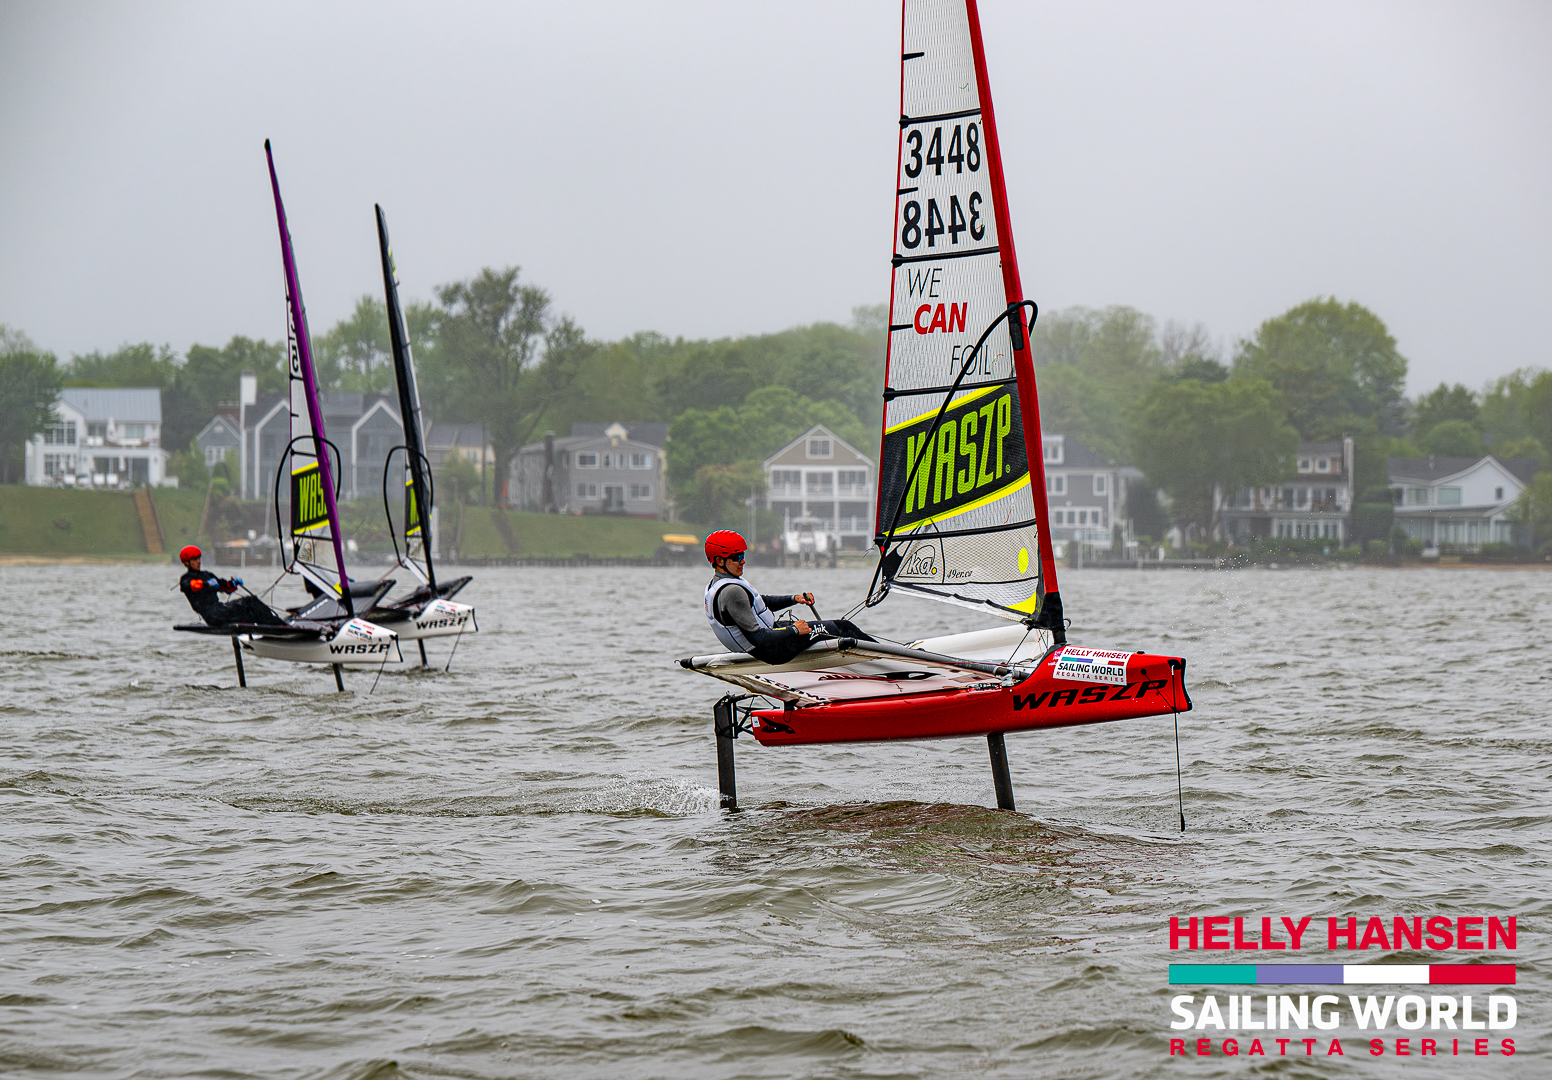 Sailing World Features the Brothers of the Waszp